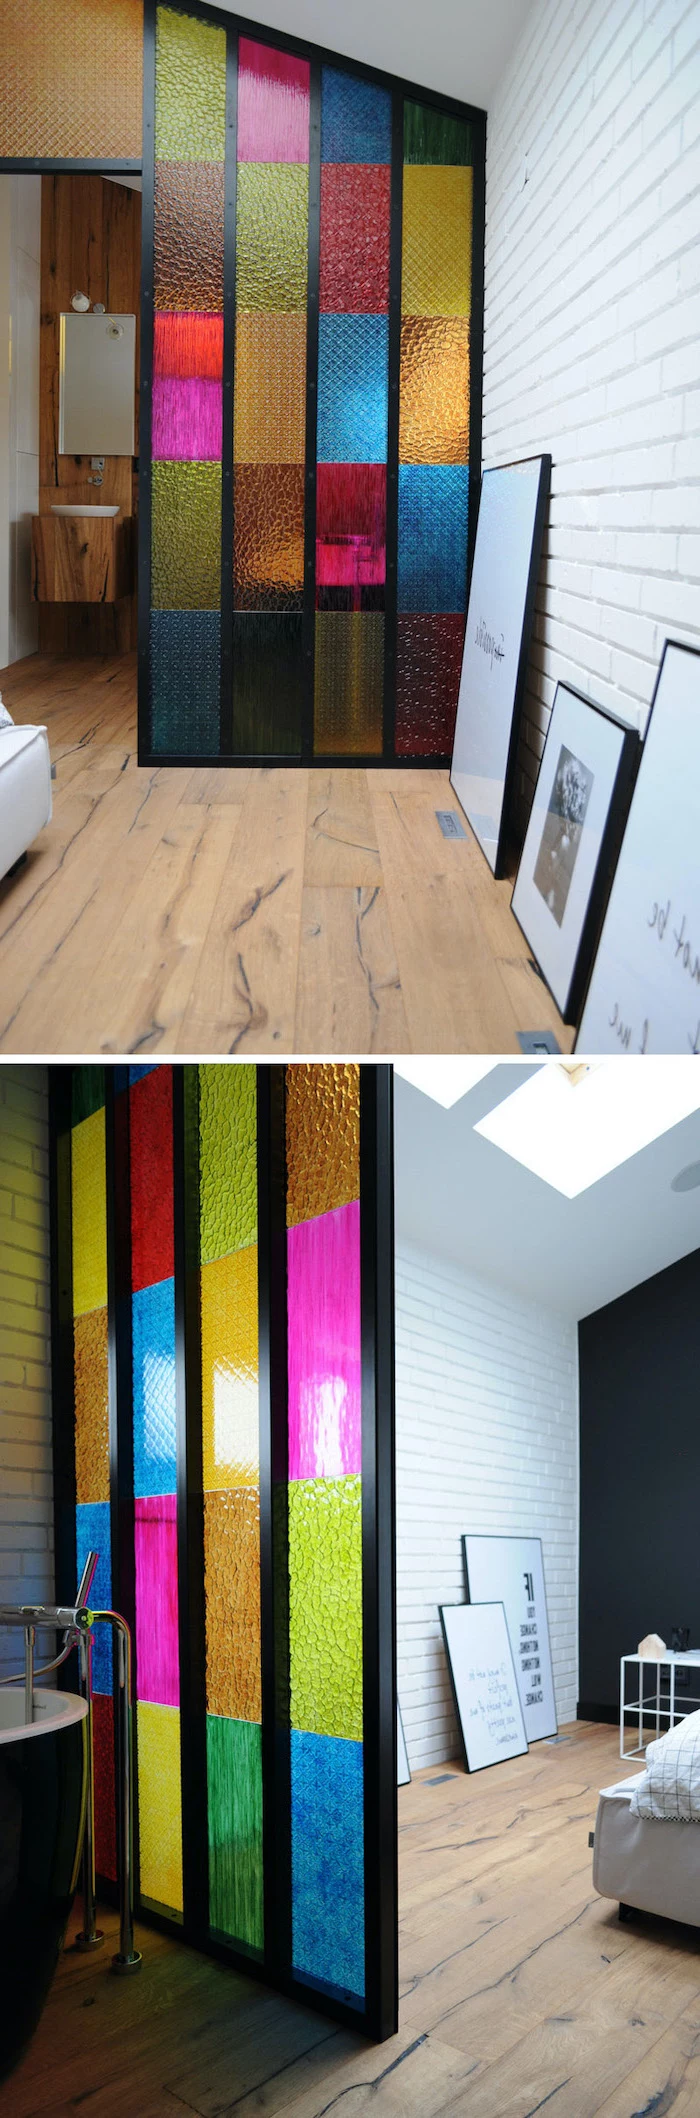 room divider with colored glass, placed between bathroom and bedroom, antique stained glass windows, white brick walls